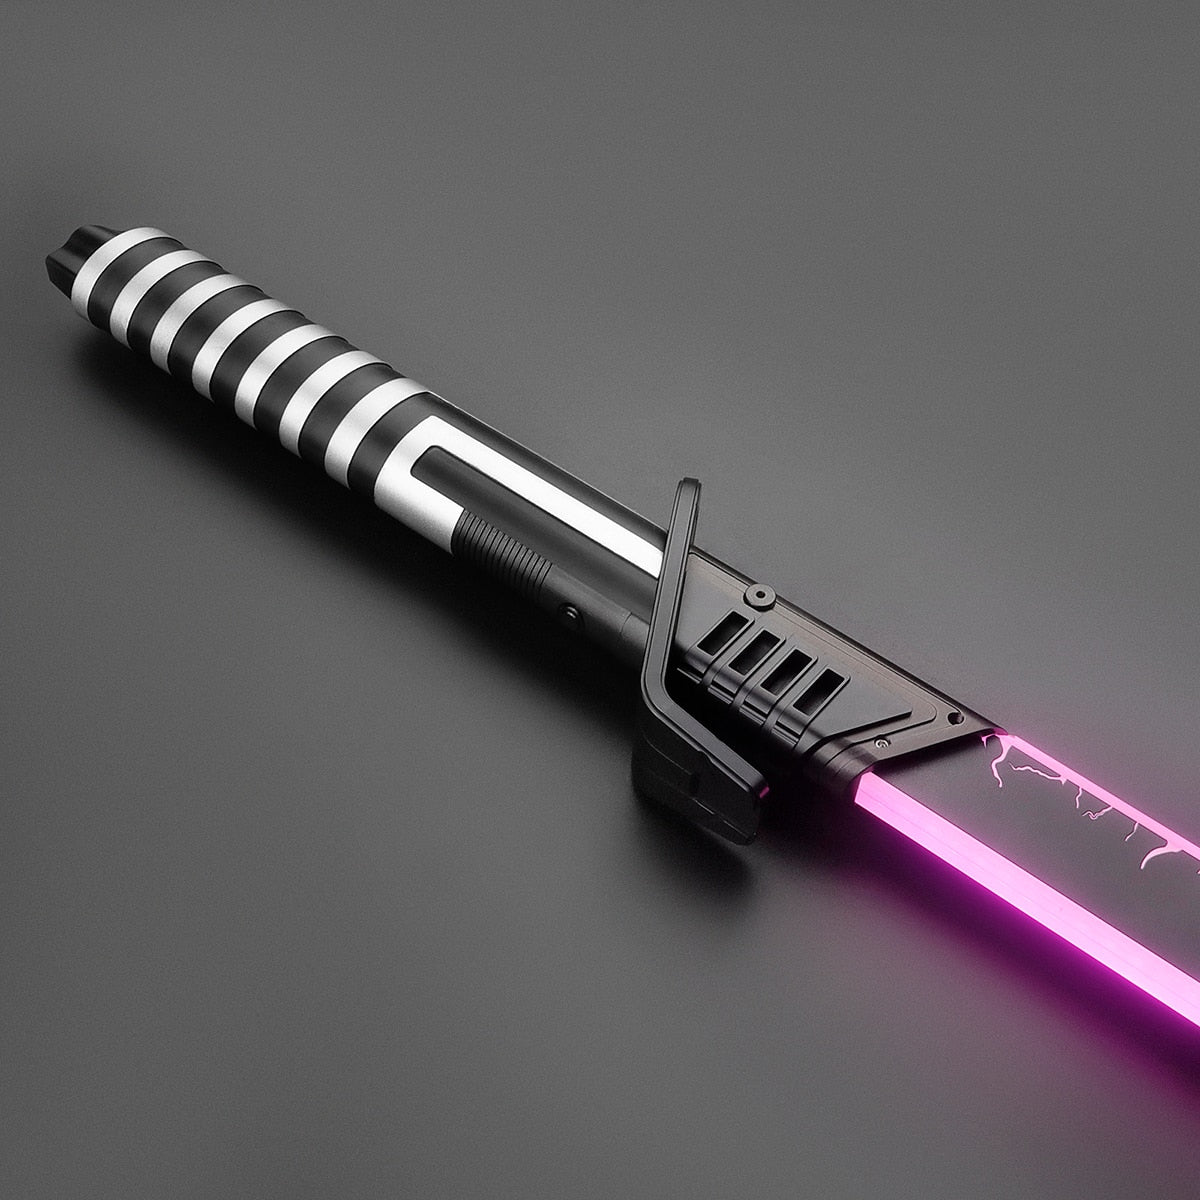 Lightsaber Katana The Ultimate Dueling Experience Cyber Techwear 1472